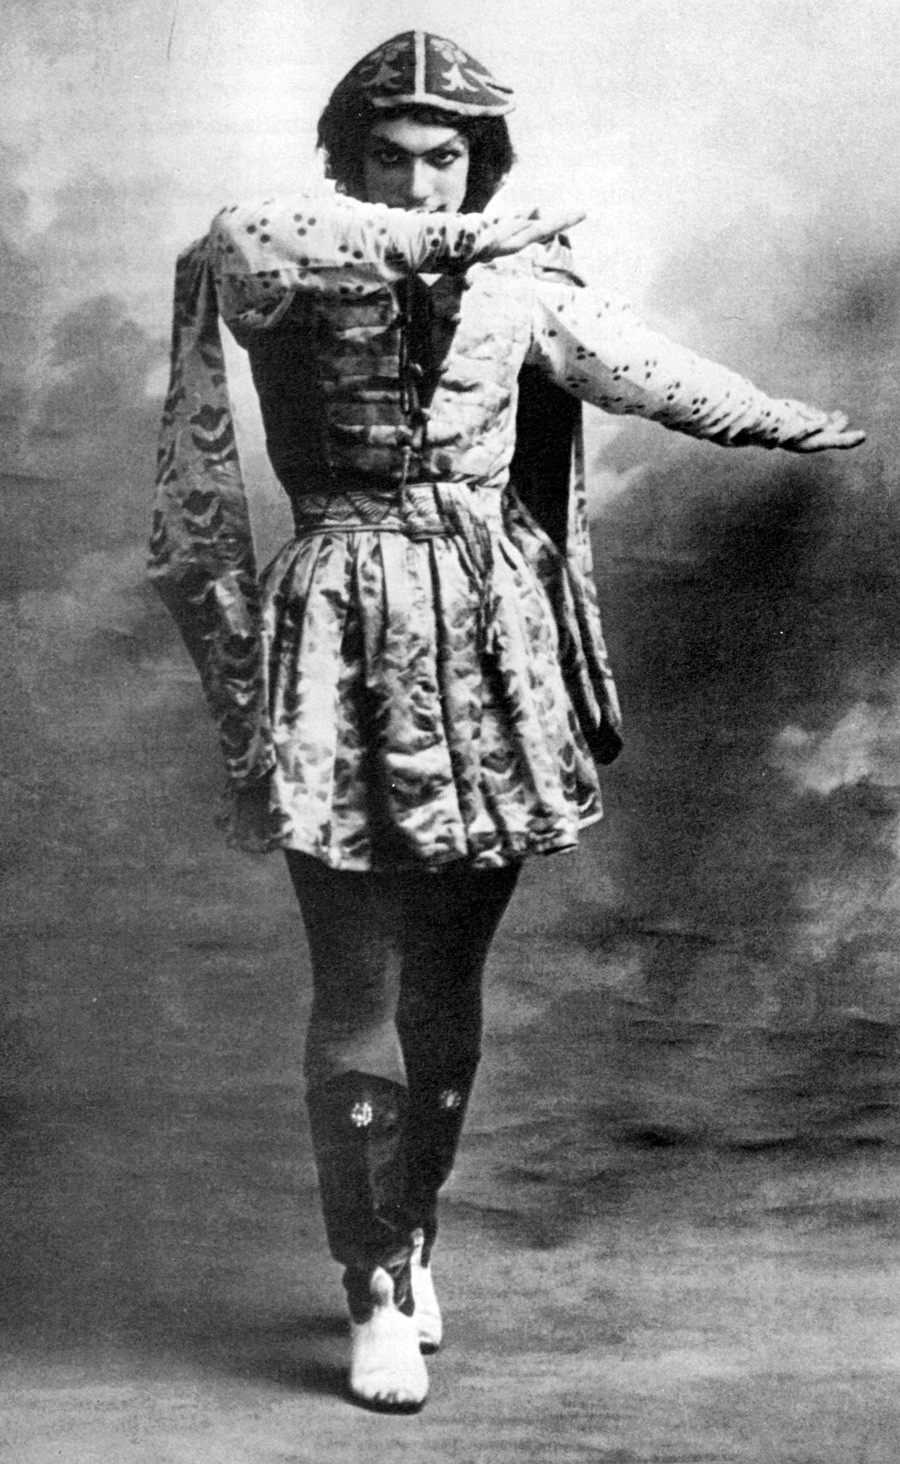 Vaslav Nijinsky (1889-1950) was a Russian ballet dancer who is often cited as the greatest male dancer of the early 20th century. Here he is wearing high boots and a long tunic, peering above his right arm, left arm extended to the side in the Grand pas classique hongrois from Le festin.